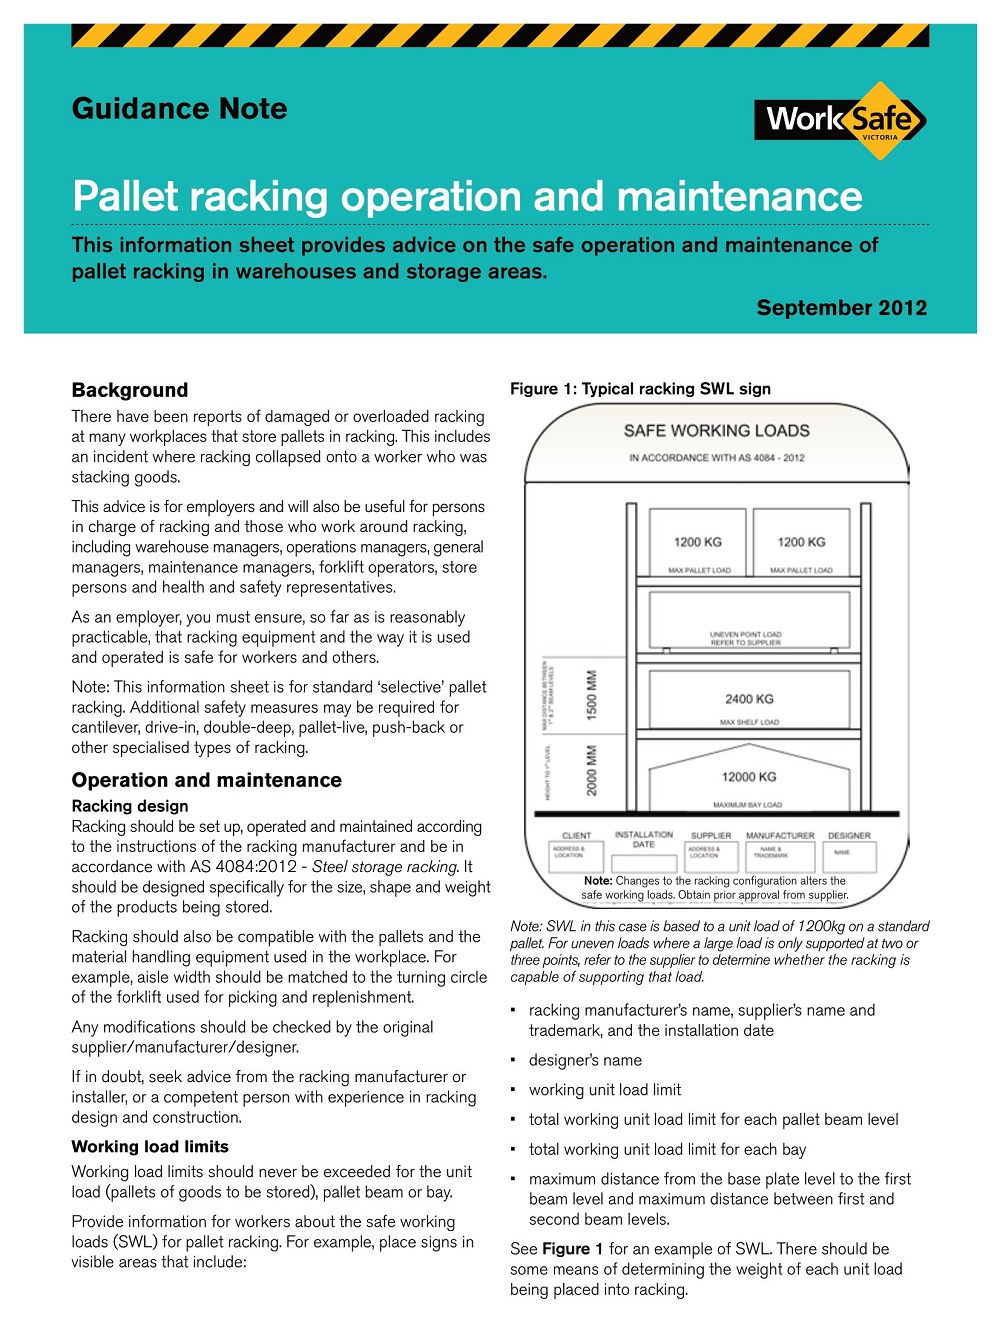 Warehouse Pallet Racking Guidance Note